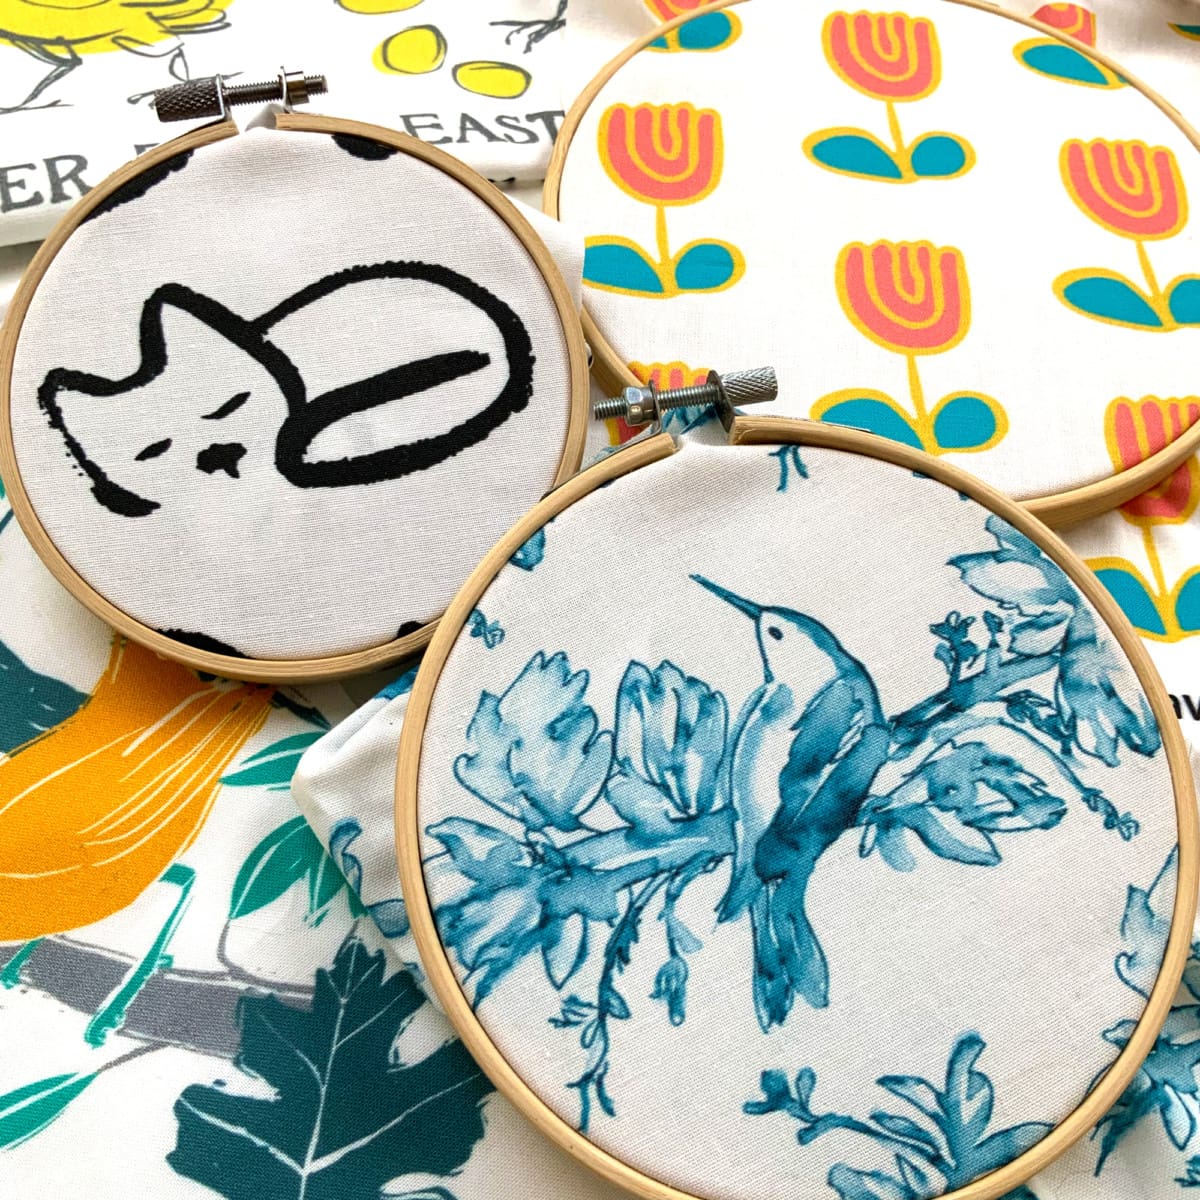 thread artwork with patterned cats, bird, and tulips